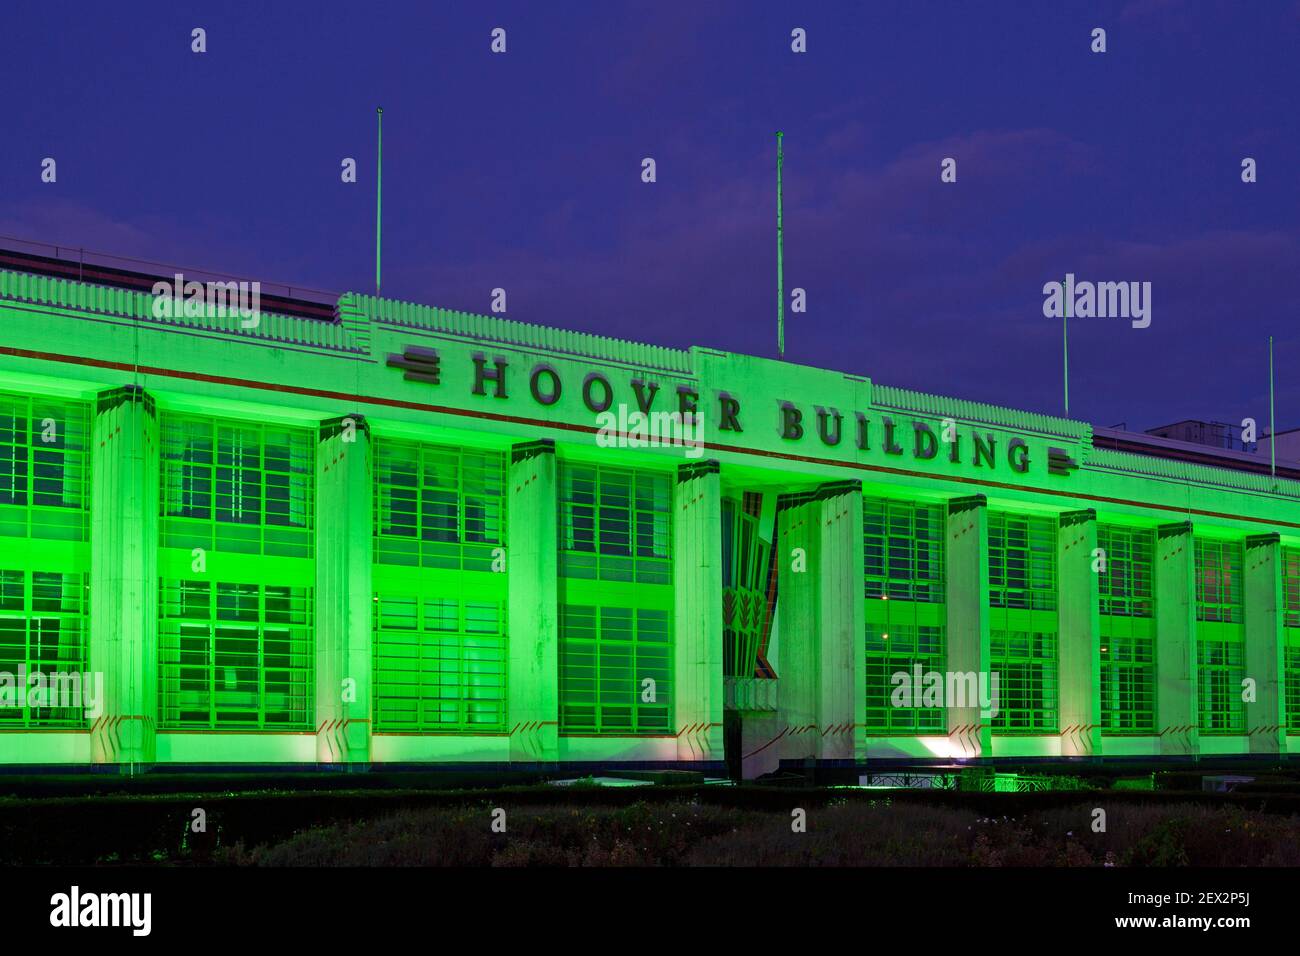 Hoover Art Deco Building at night built in 1933 in Perivale,Ealing,London England Stock Photo